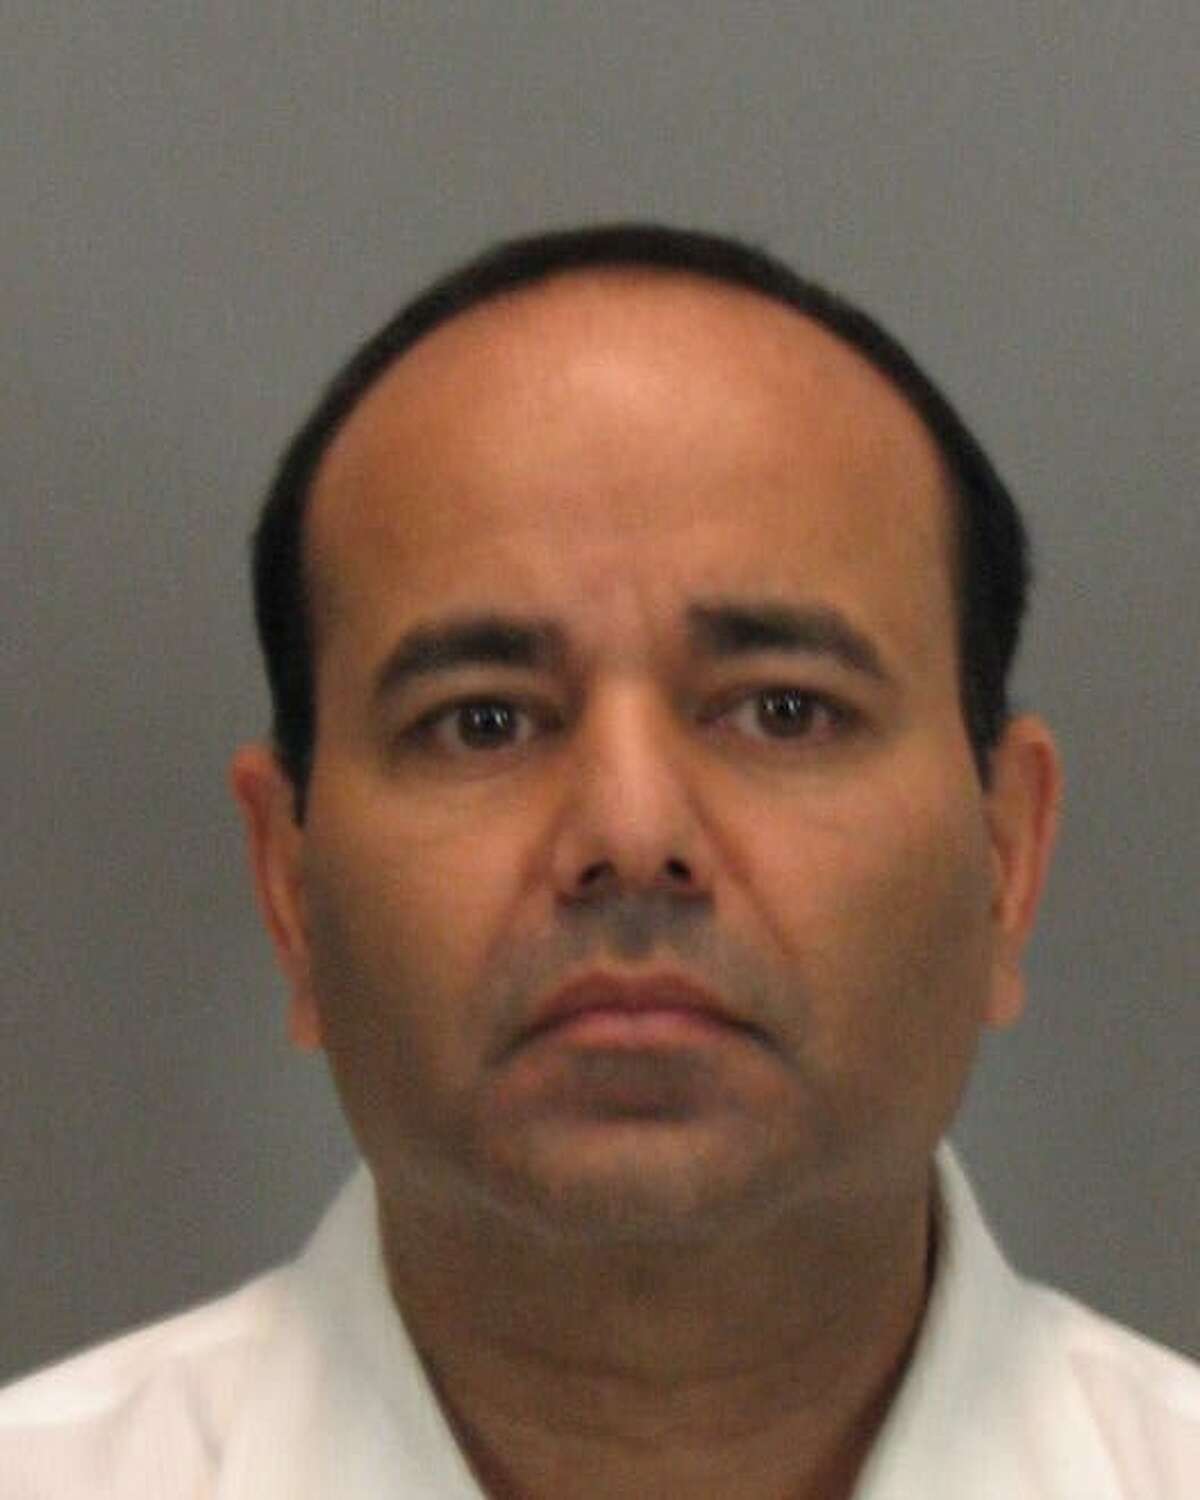 Ausaf Umar Siddiqui appears in this undated booking photo provided by the Santa Clara County (Calif.) Sheriff's Office. Siddiqui, a former vice president of Fry's Electronics Inc., has been arrested on charges of embezzling more than $65 million from the retailer to fuel his lavish lifestyle and pay off debts. (AP Photo/Santa Clara County Sheriff via the San Jose Mercury News) Ran on: 12-24-2008 Ausaf Umar Siddiqui worked at Frys Electronics for 20 years. Ran on: 12-24-2008 Ausaf Umar Siddiqui worked at Frys Electronics for 20 years. Ran on: 12-25-2008 Ausaf Umar Siddiqui is accused of embezzling money from Frys through a $65 million kickback scam. Ran on: 12-25-2008 Ausaf Umar Siddiqui is accused of embezzling money from Frys through a $65 million kickback scam. Ran on: 12-27-2008 Ausaf Umar Siddiqui is a former vice president of Frys accused of embezzling more than $65 million.